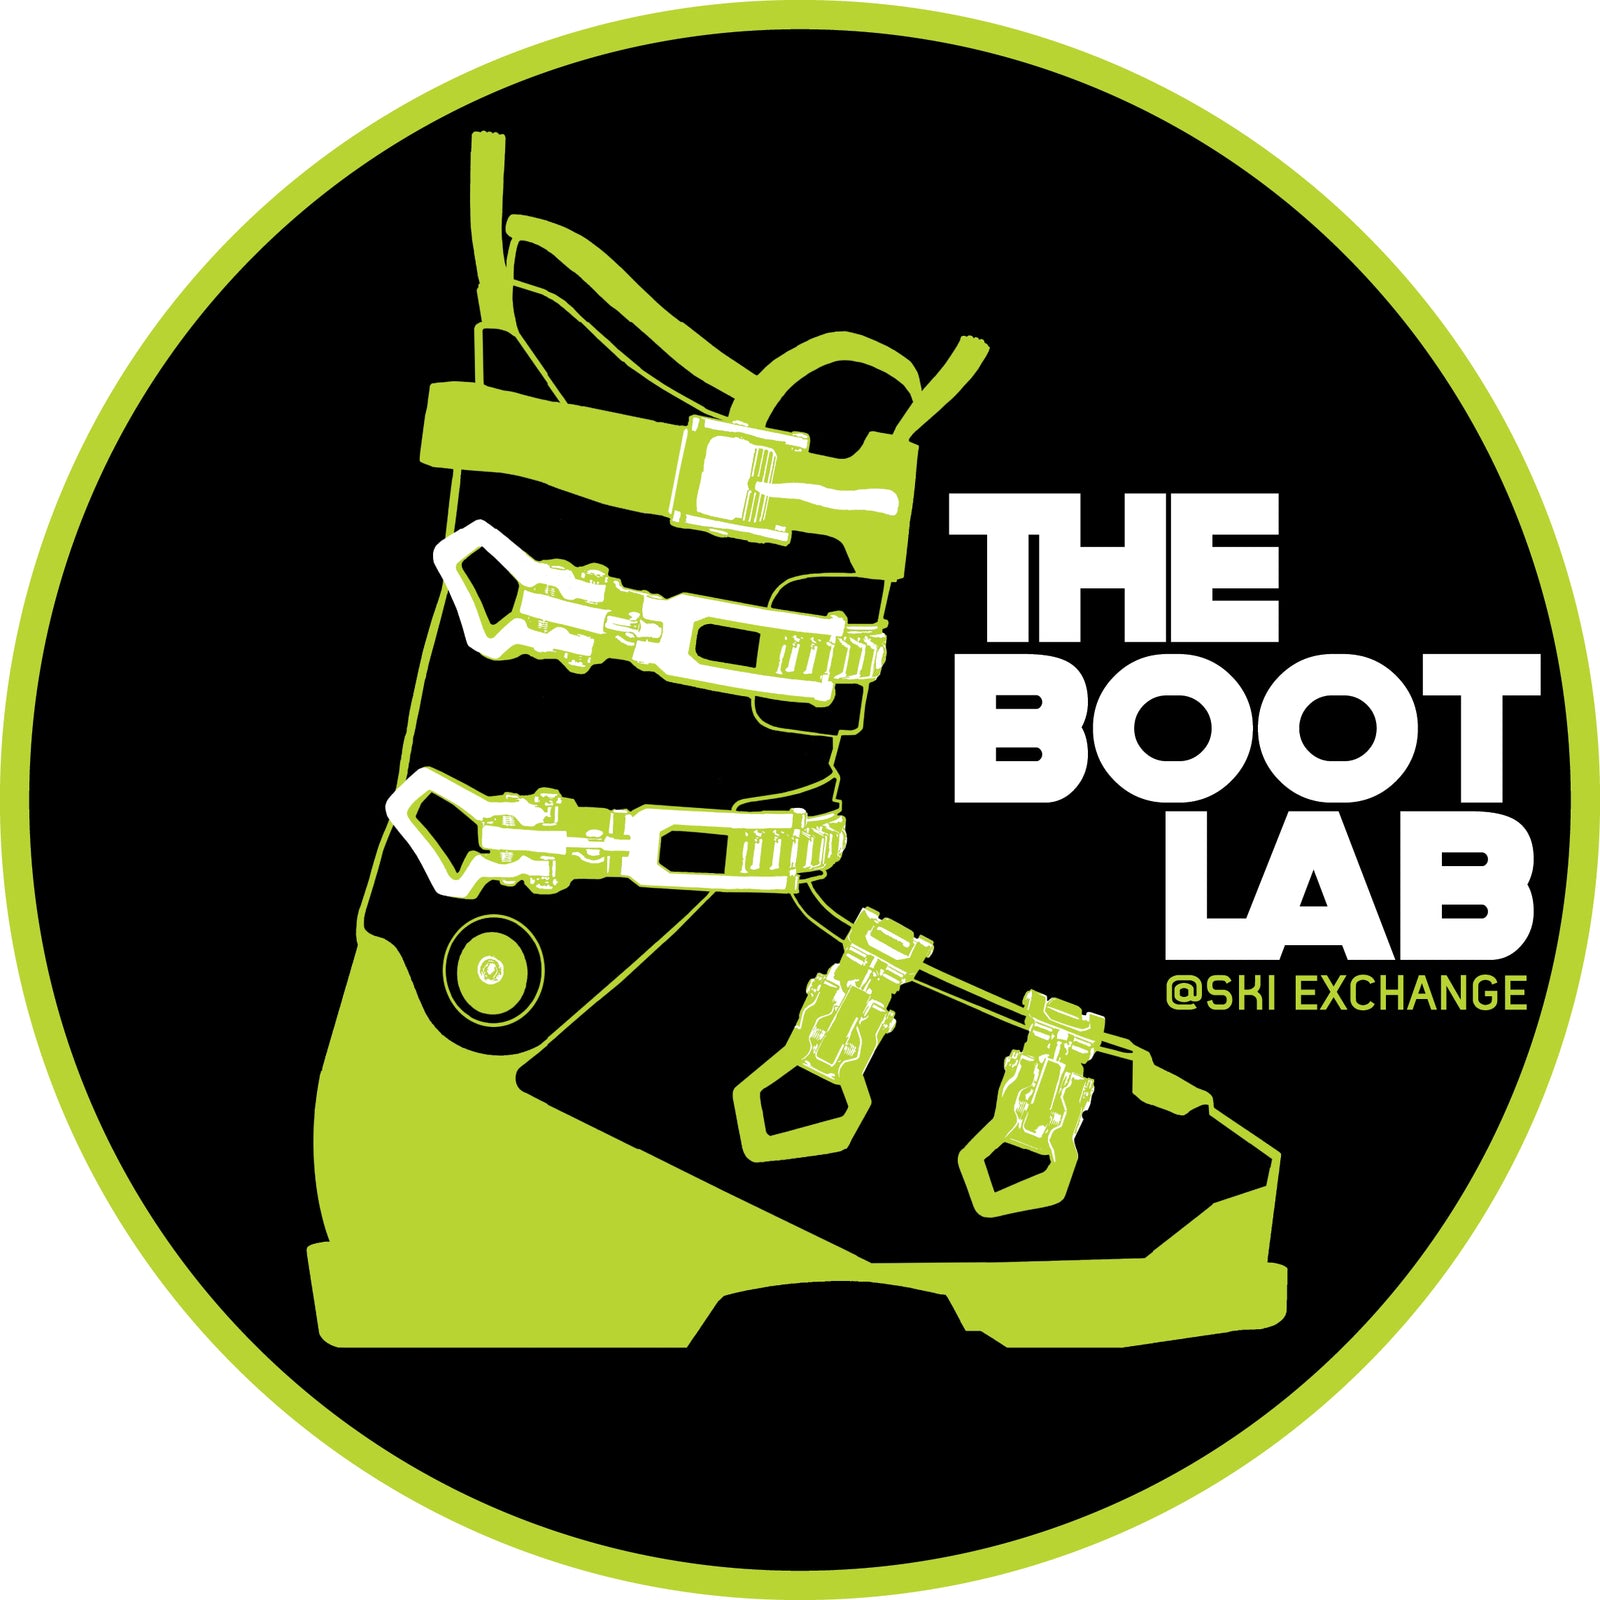 5 things that help make our Boot Lab on of the best!